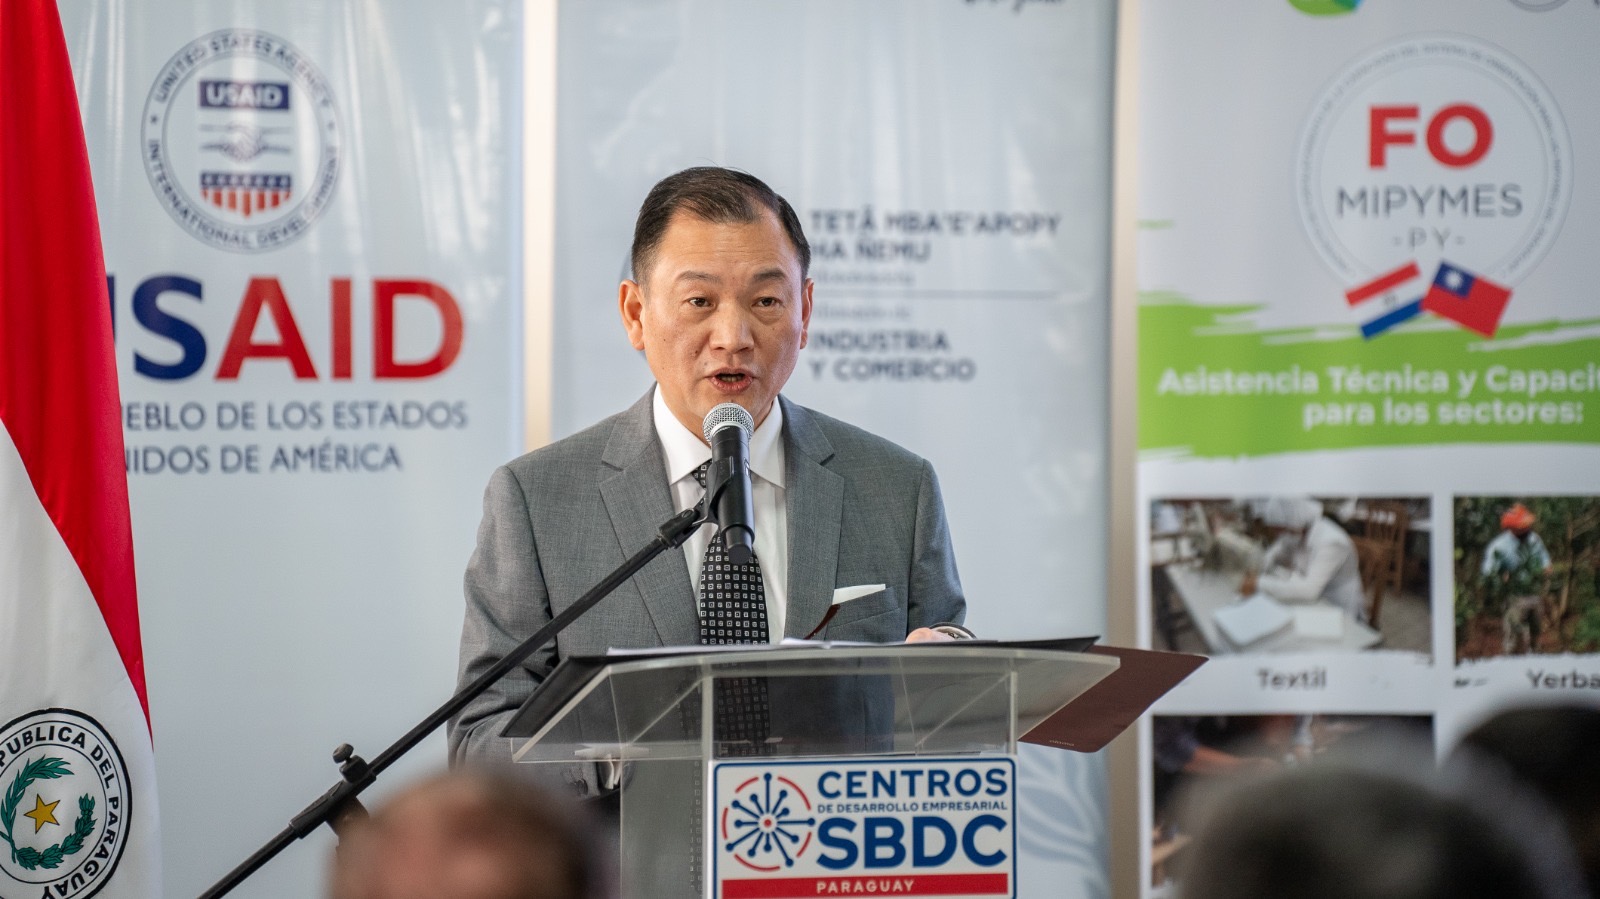 Taiwan-U.S. collaboration opens its first SBDC in Asunción to support small businesses in Paraguay